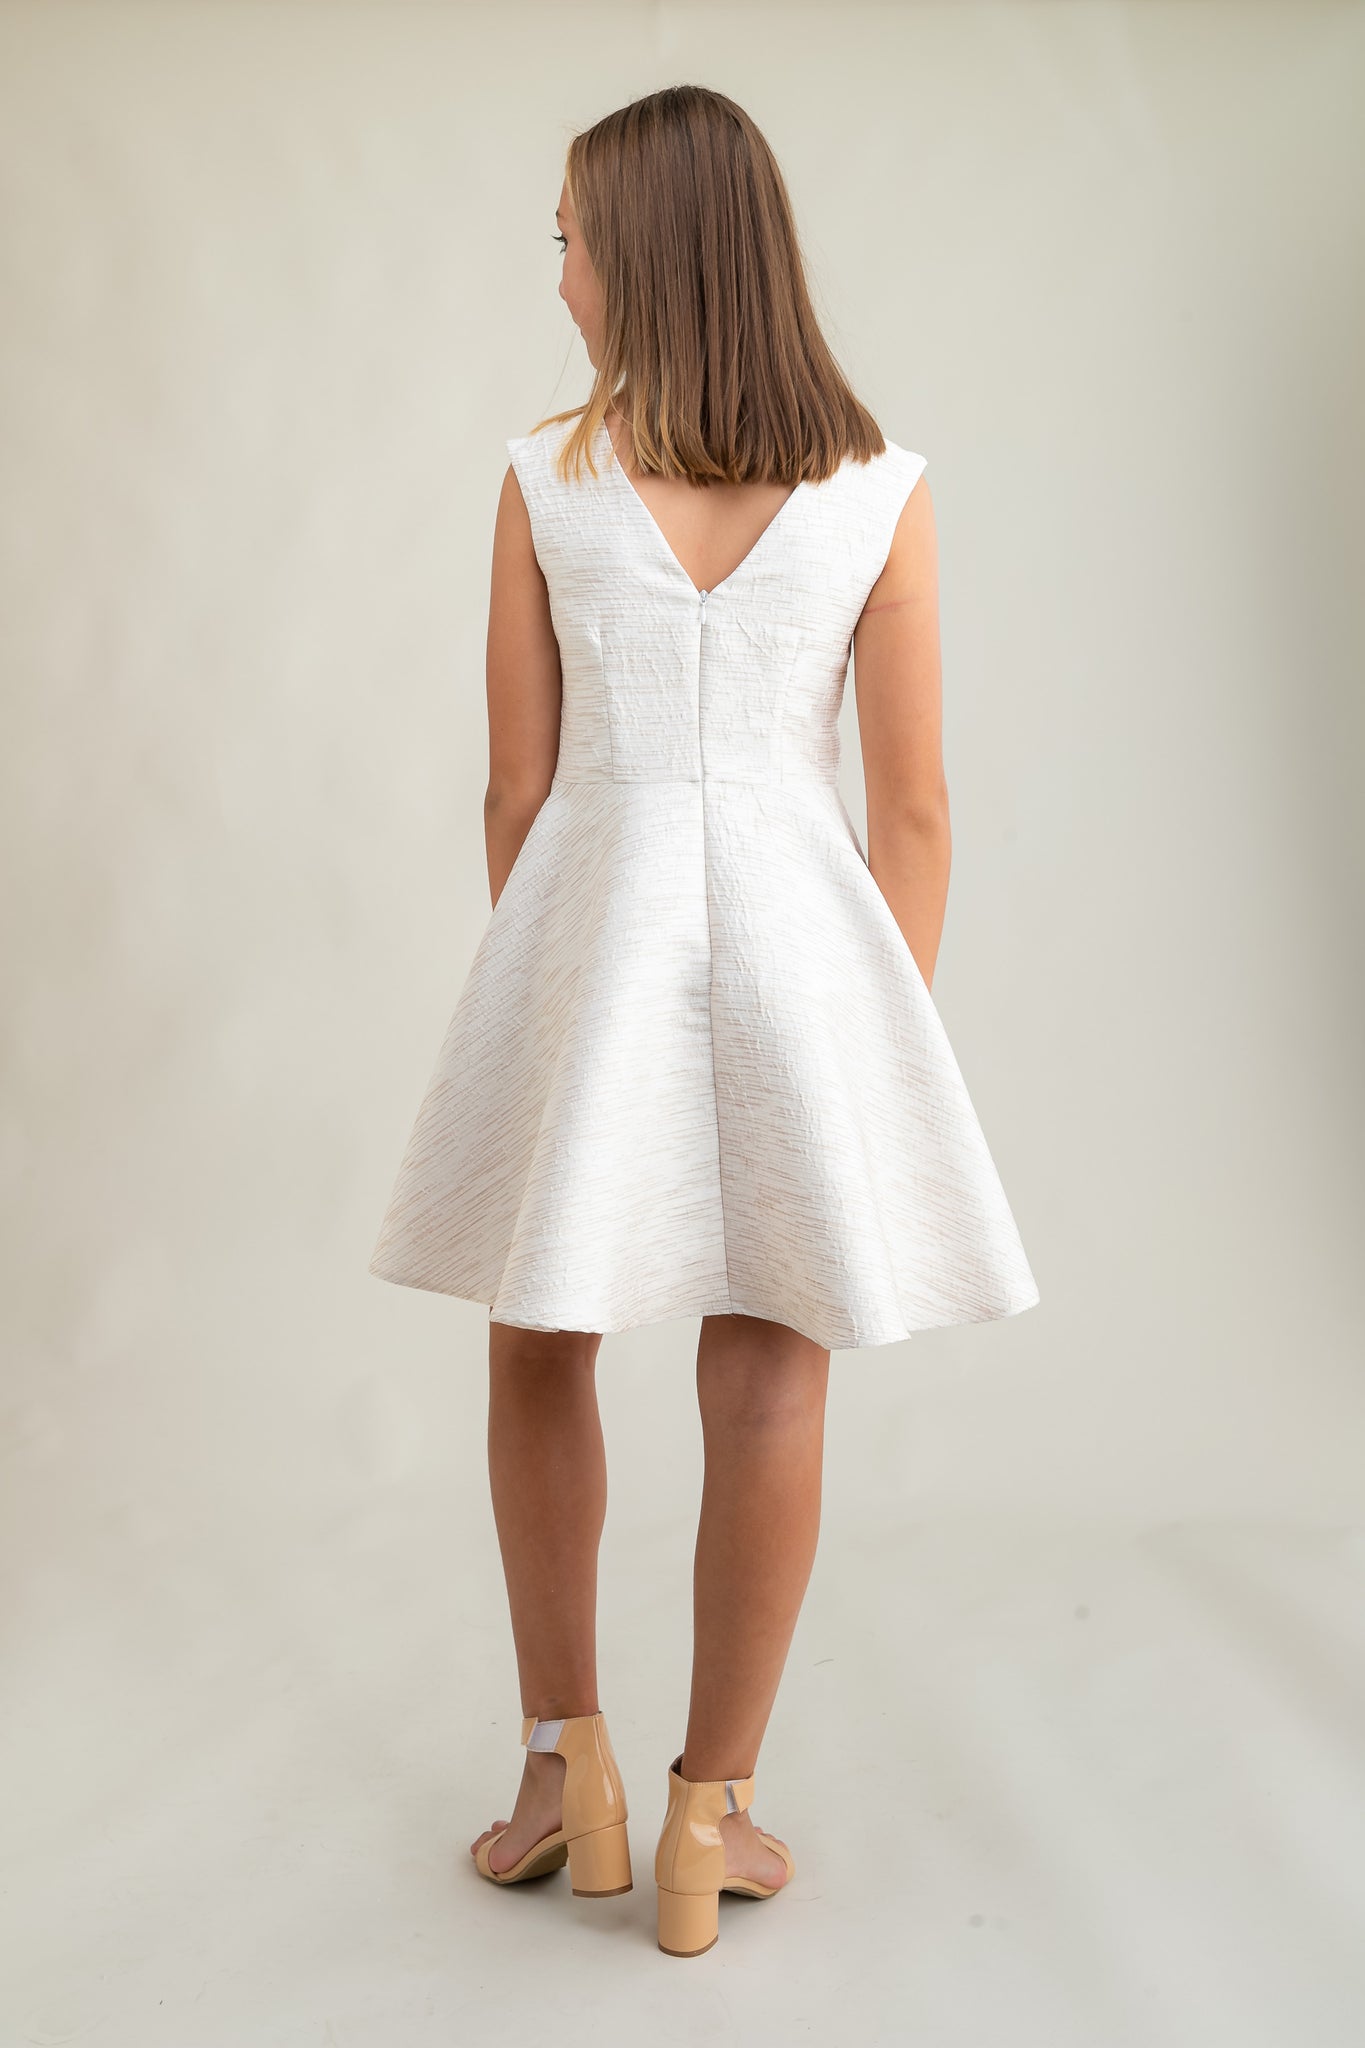 This is an all over jacquard, cap sleeve dress in ivory with non-stretch material, zipper back, and longer length detailing. This dress is perfect for any religious event like bat mitzvah, cotillion or church service. 